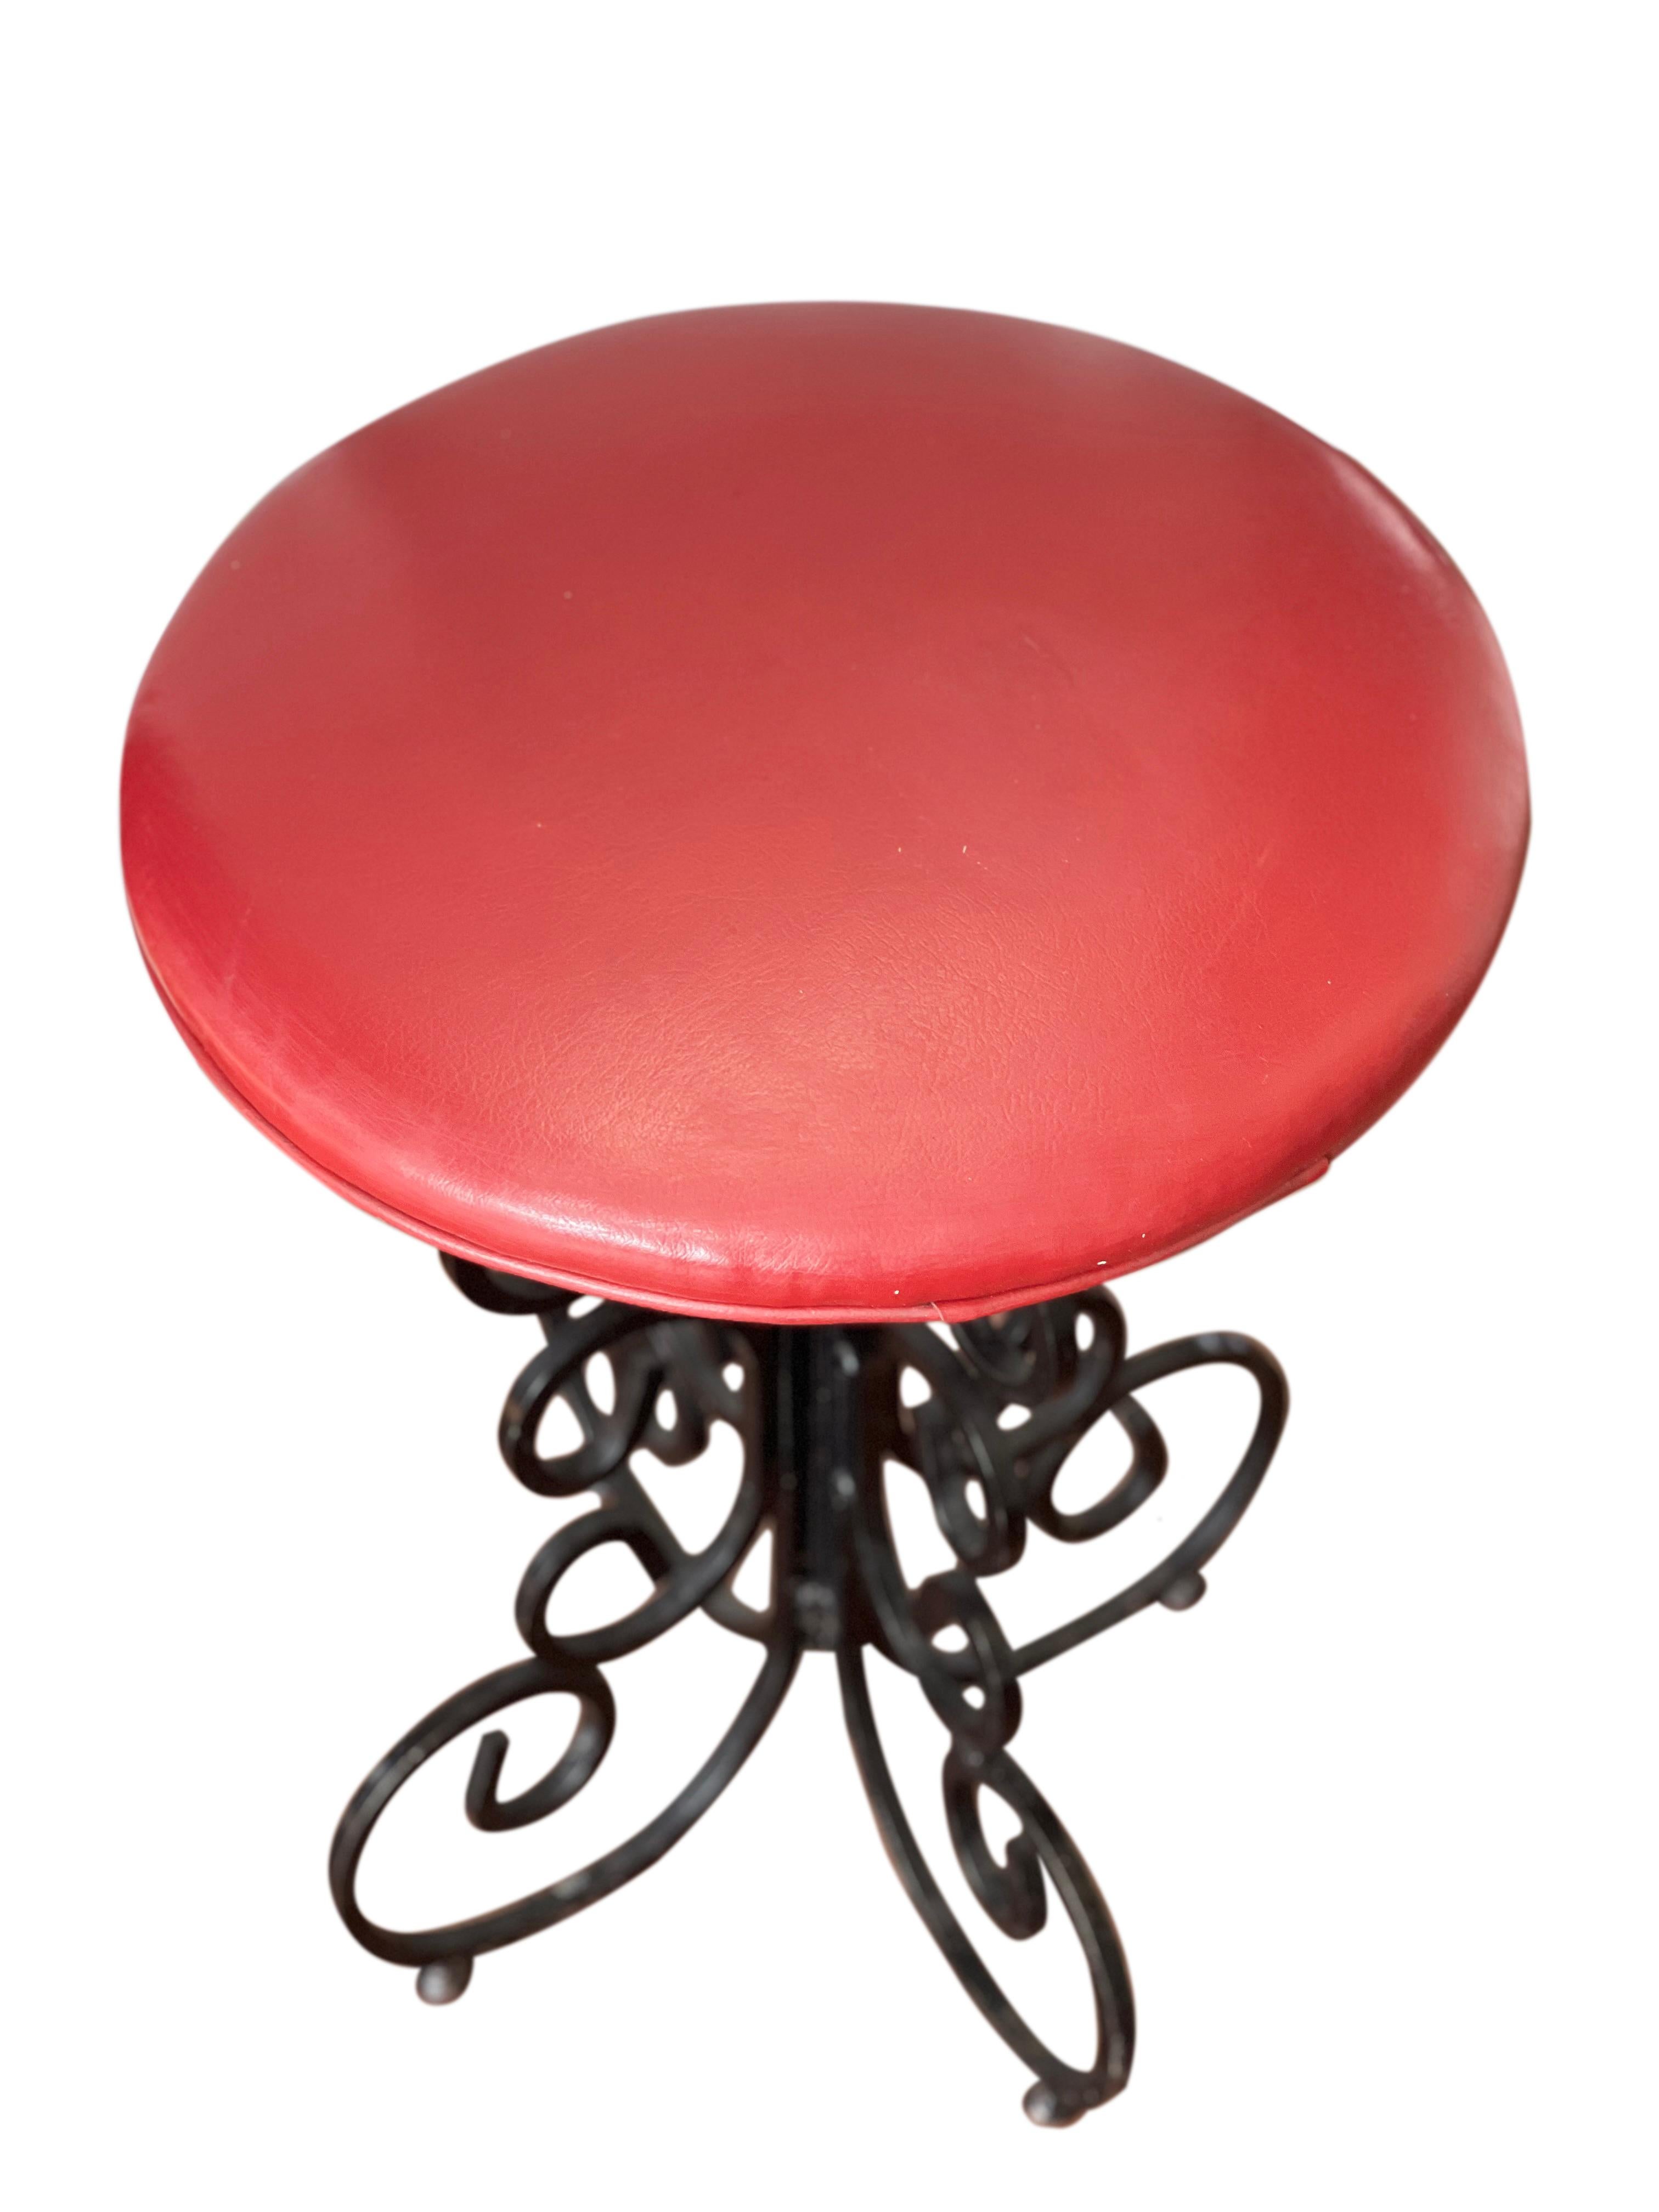 Arthur Umanoff Wrought Iron Stools, Set of 4 In Good Condition For Sale In Doylestown, PA